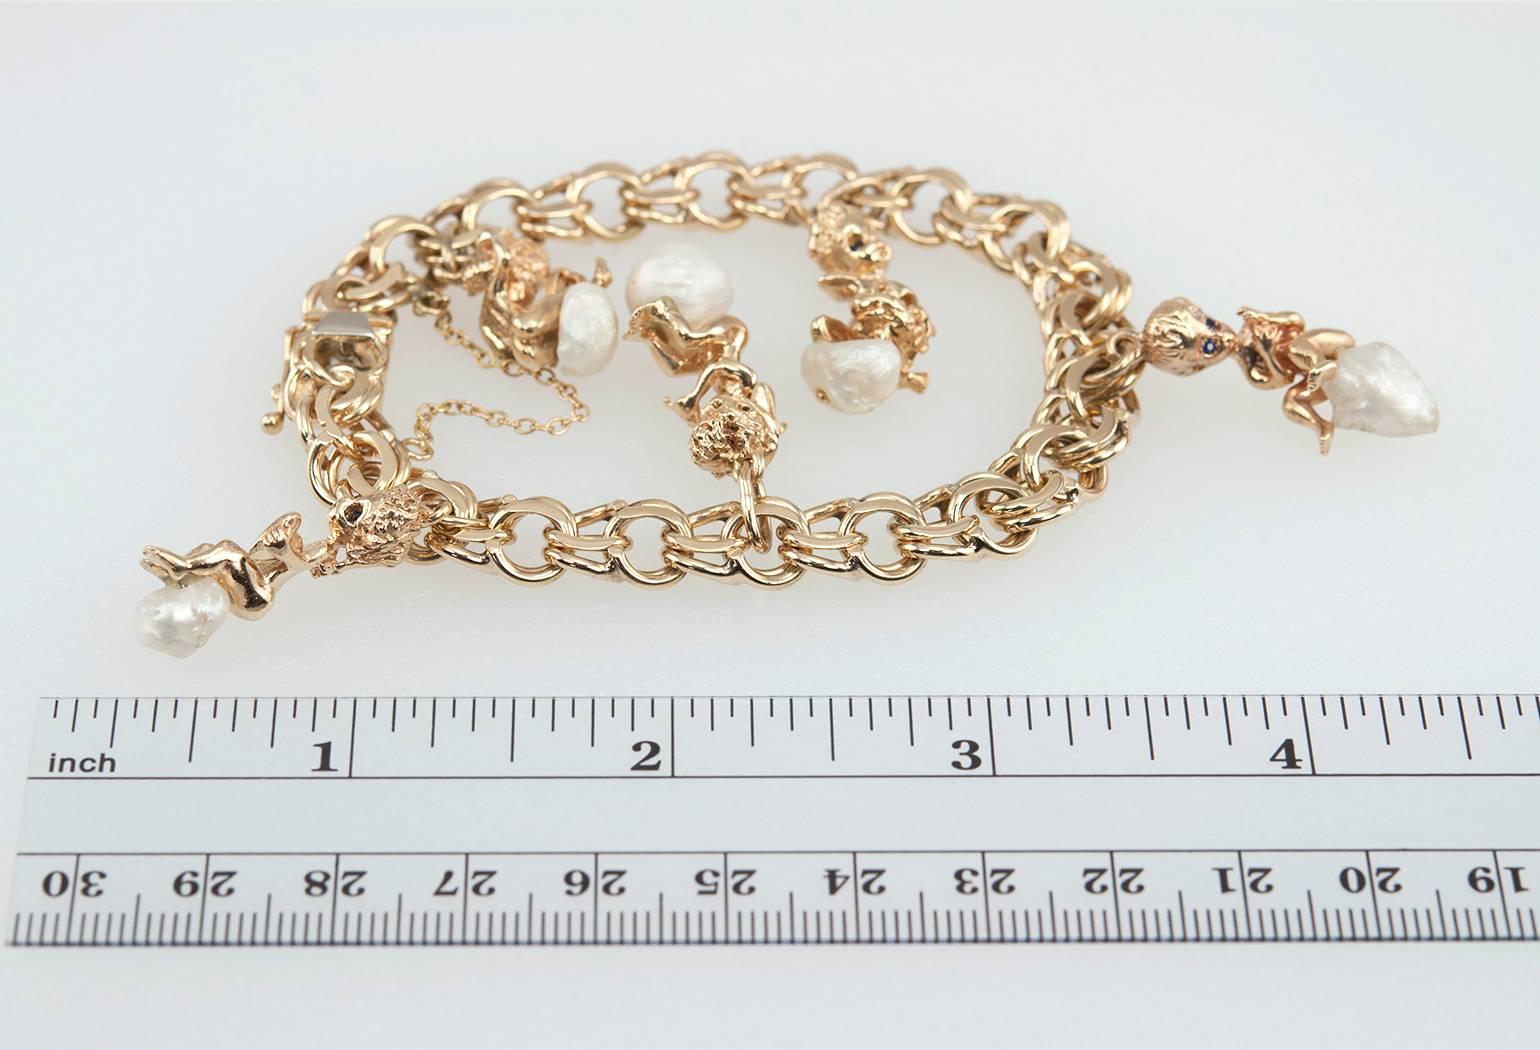 A Ruser 14 karat yellow gold charm bracelet.  This link bracelet features 5 charms that dangle from the bracelet with Ruser's babies that have sapphire eyes sitting on pearls.  Circa 1970s.

The bracelet is approximately 7 inches in diameter. The